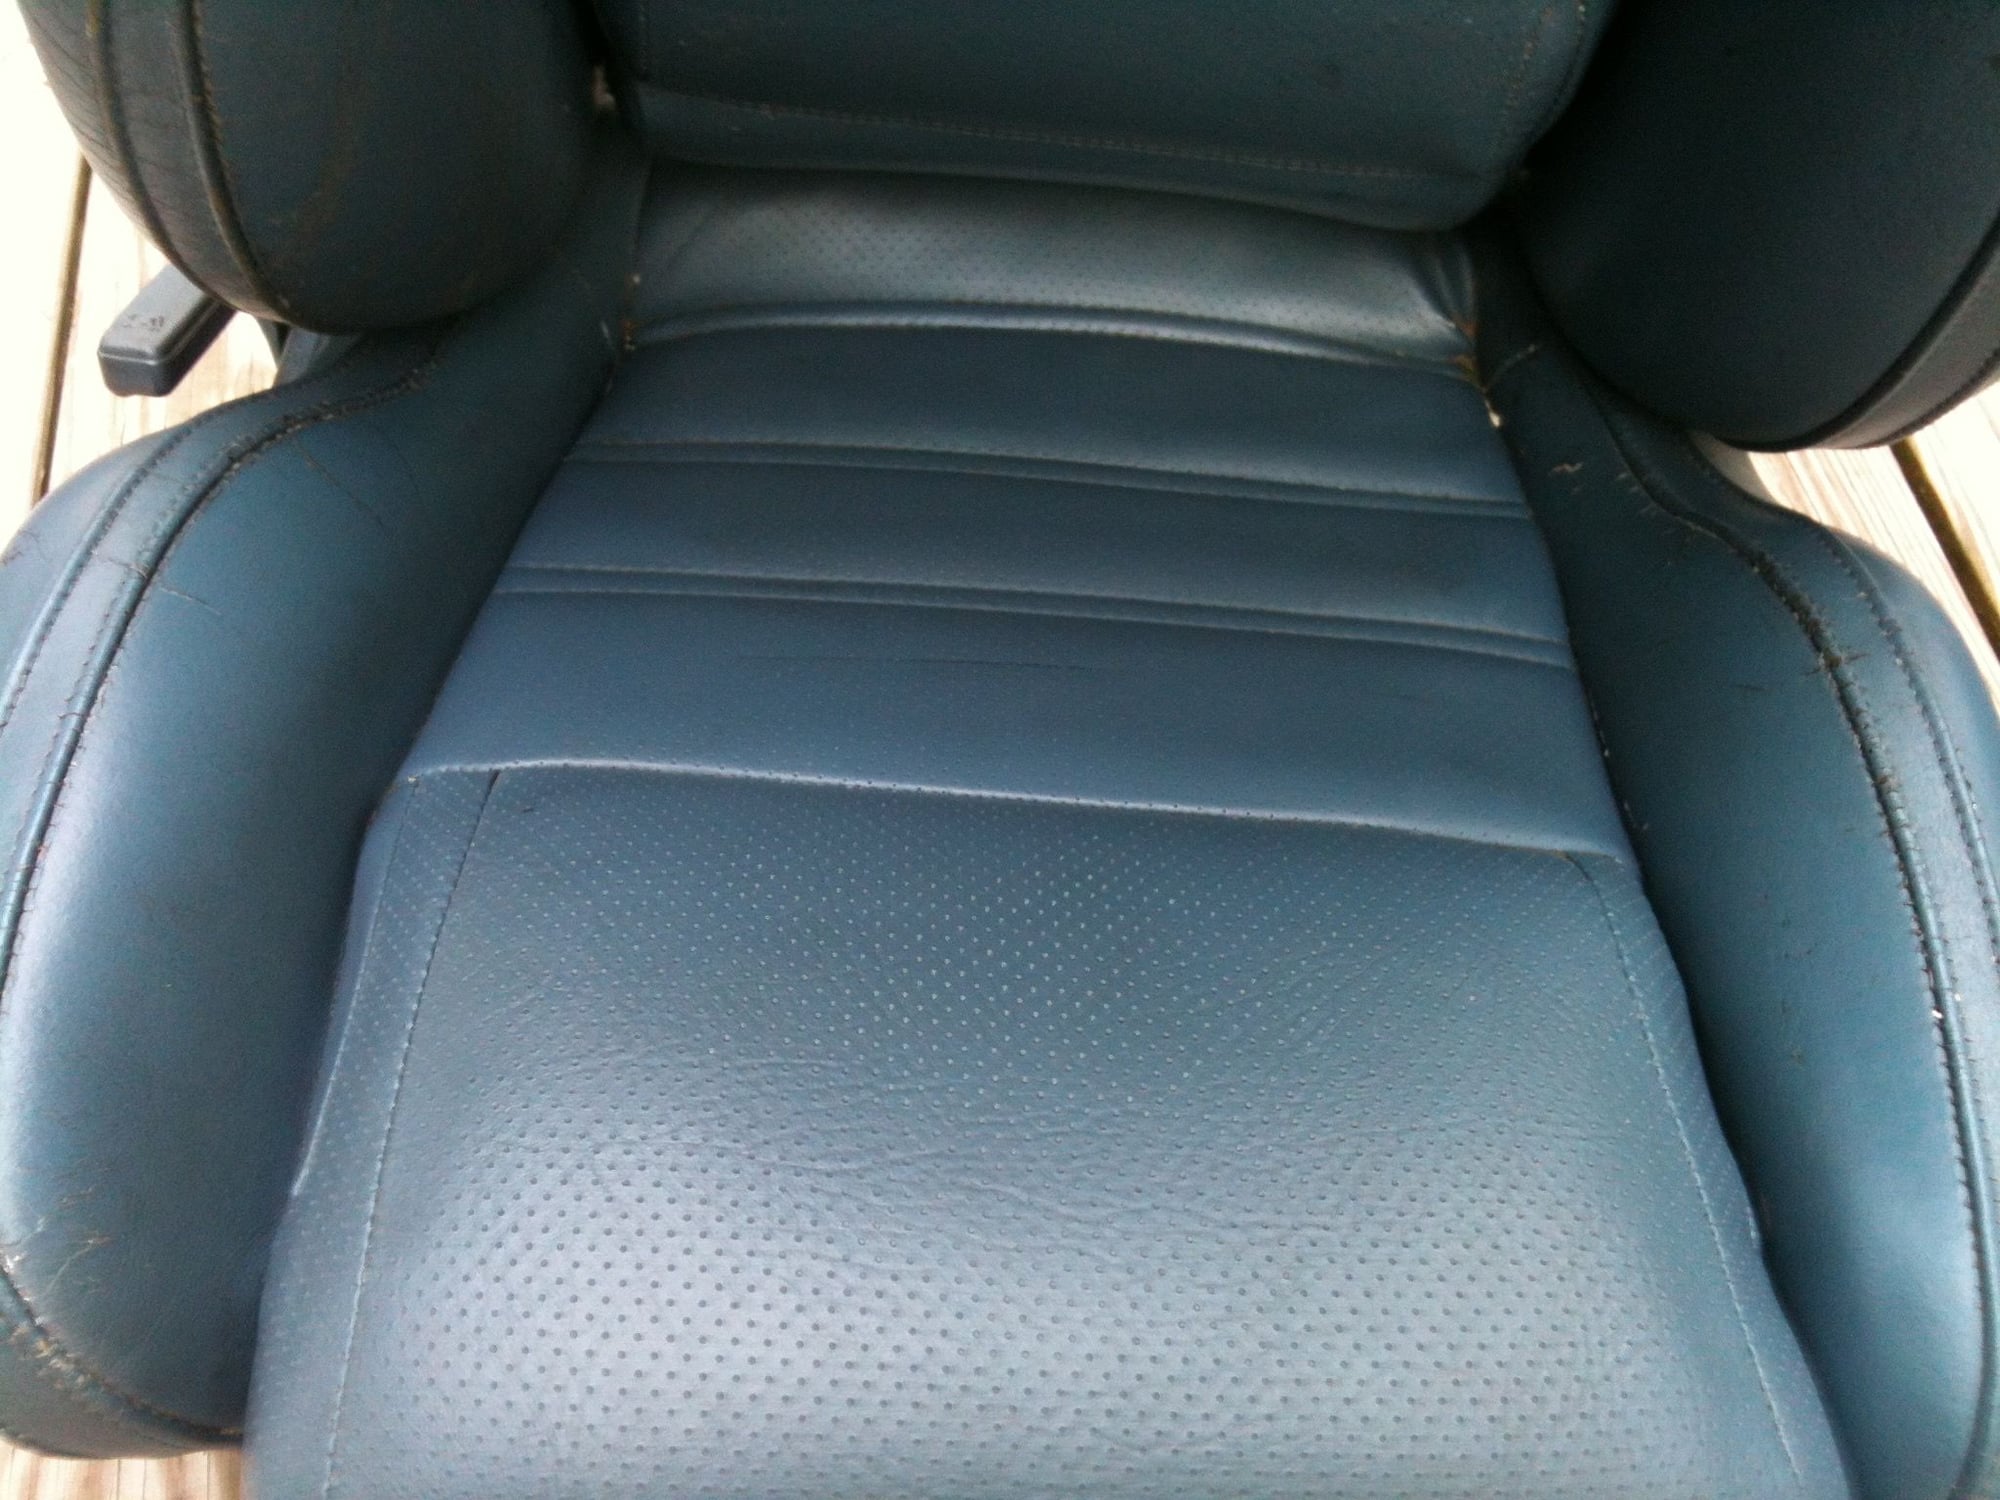 Interior/Upholstery - Pair of Blue leather convertible seats (with headsets) and rails - Used - 1988 to 1991 Mazda RX-7 - Nashville, TN 37212, United States